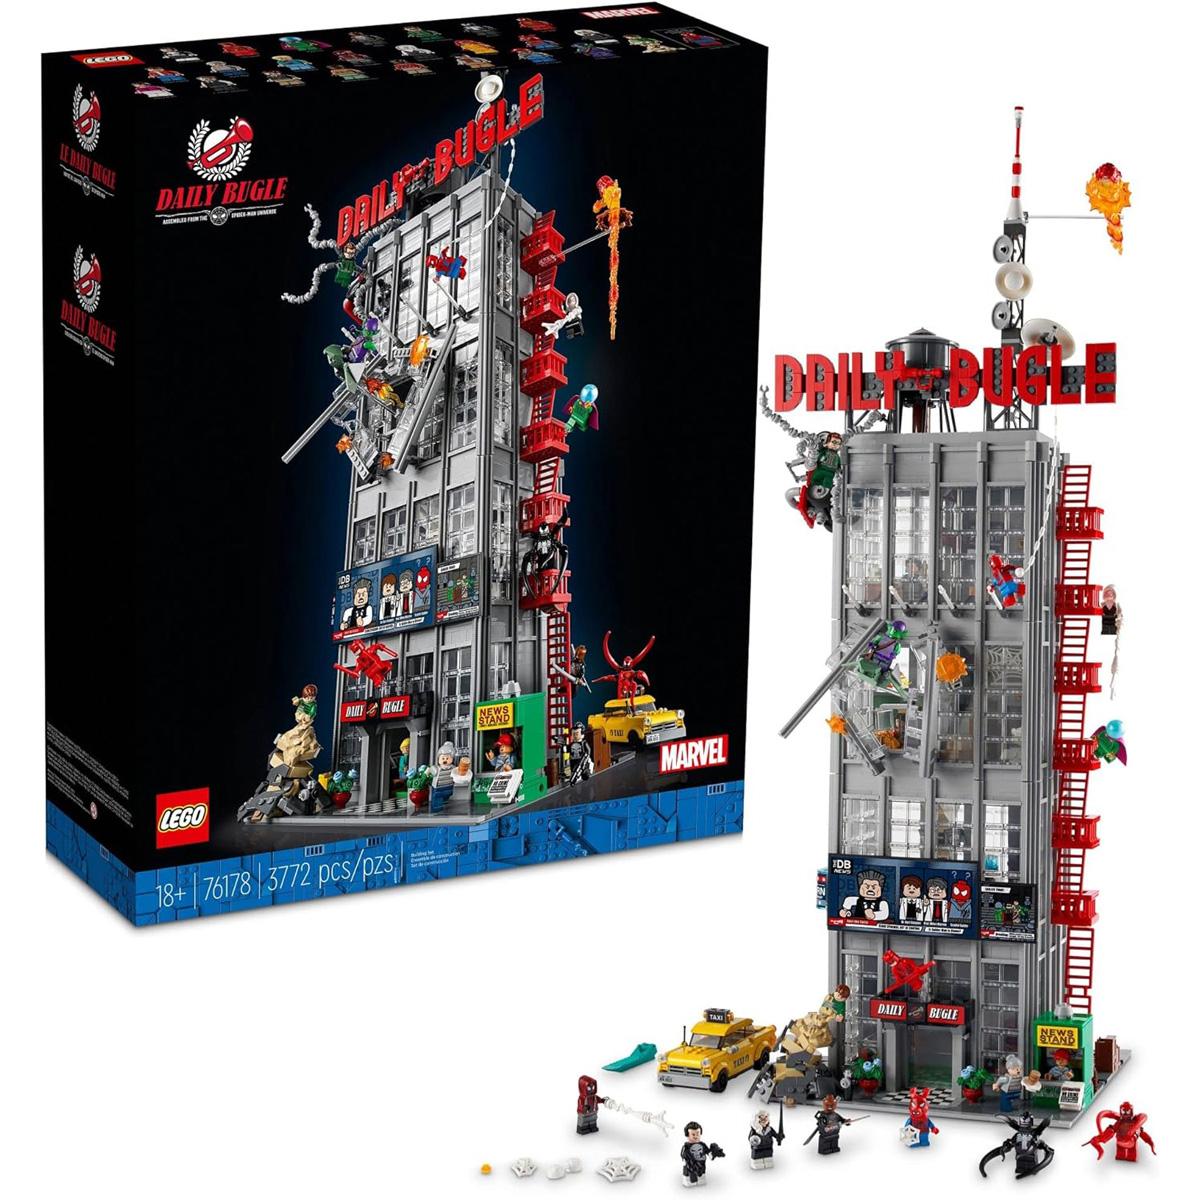 LEGO Marvel Spider-Man Daily Bugle Newspaper Office Set 76178 for $243.99 Shipped